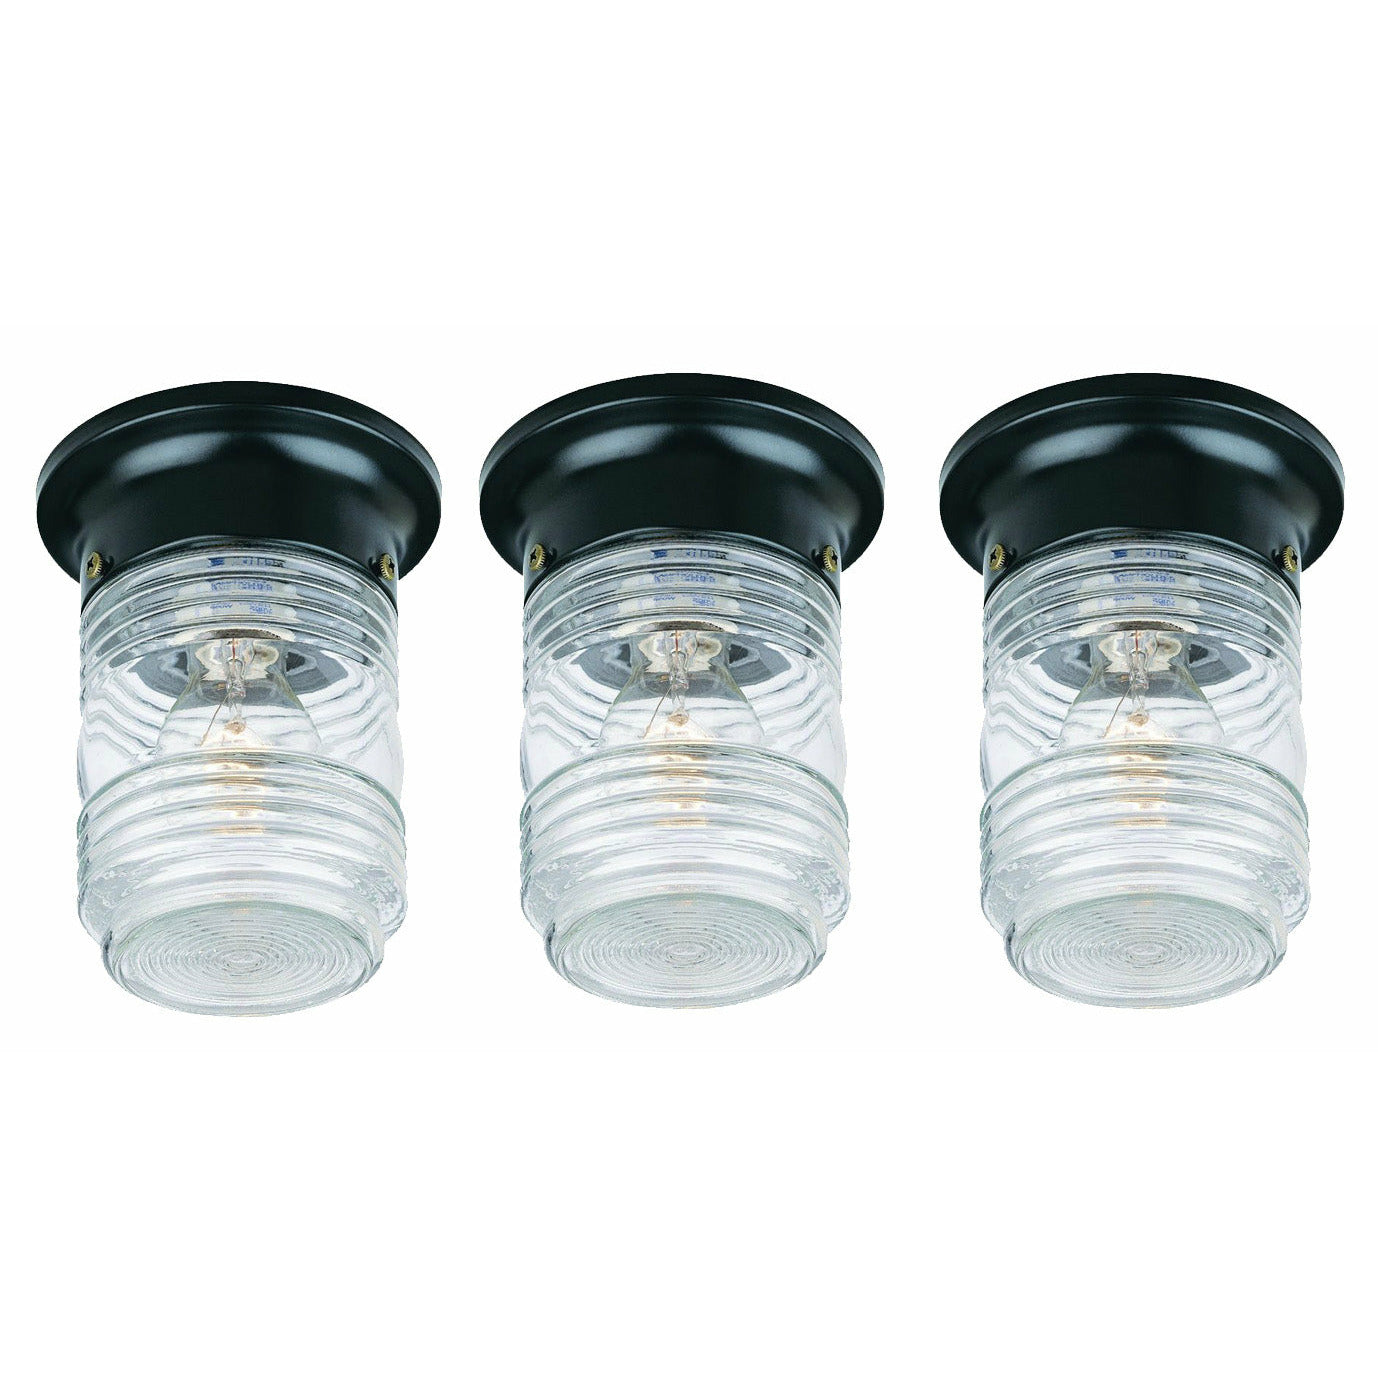 Builder's Choice Outdoor Ceiling Light (3 Pack)